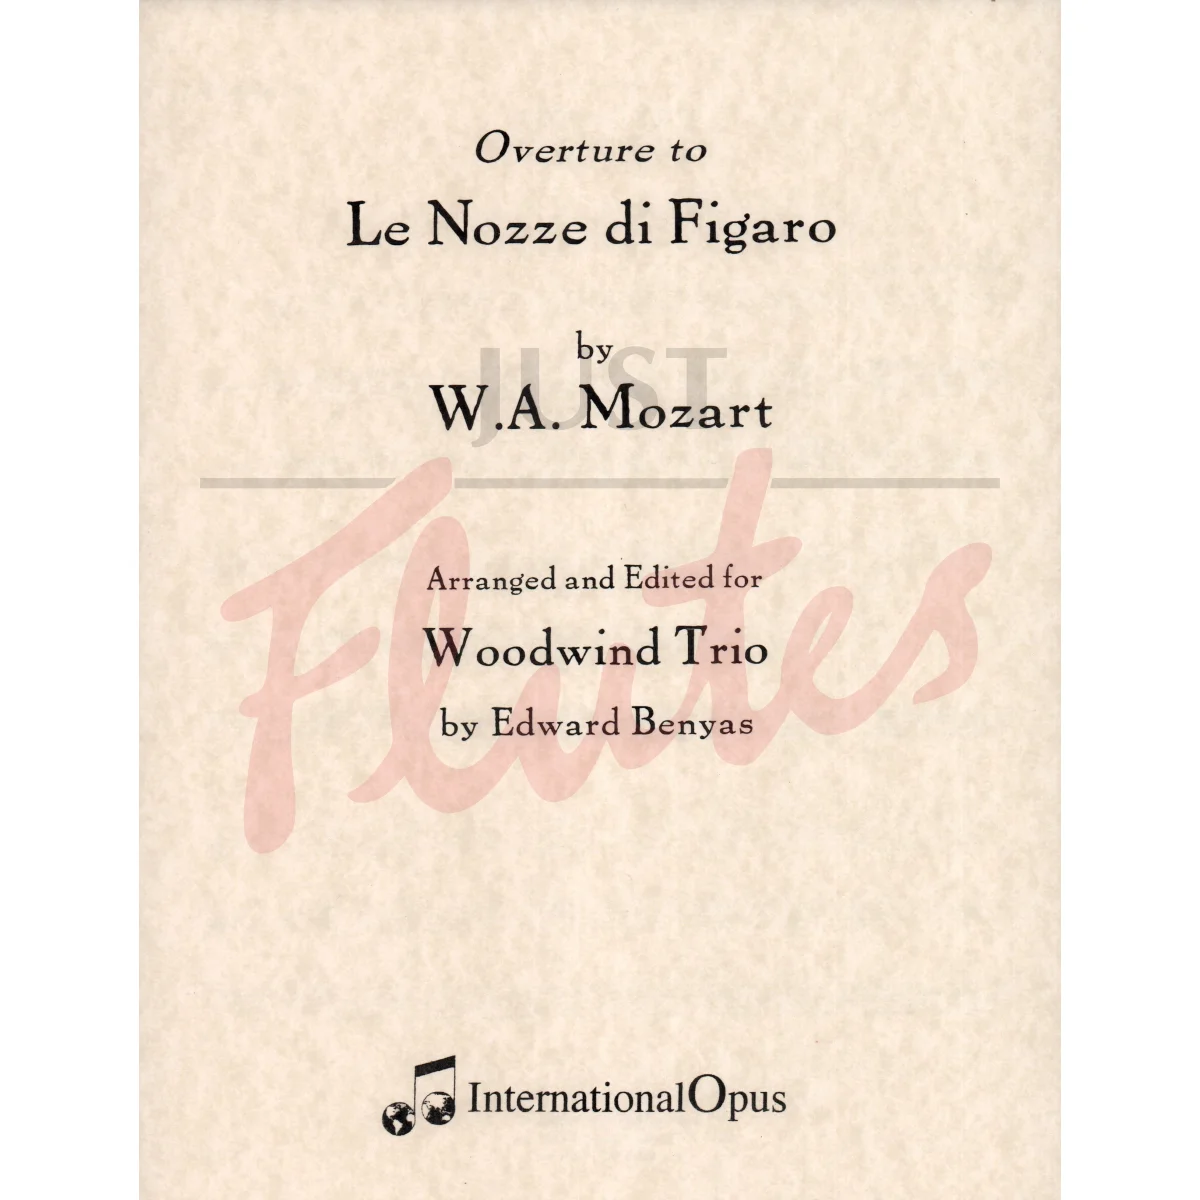 Marriage of Figaro Overture for Wind Trio